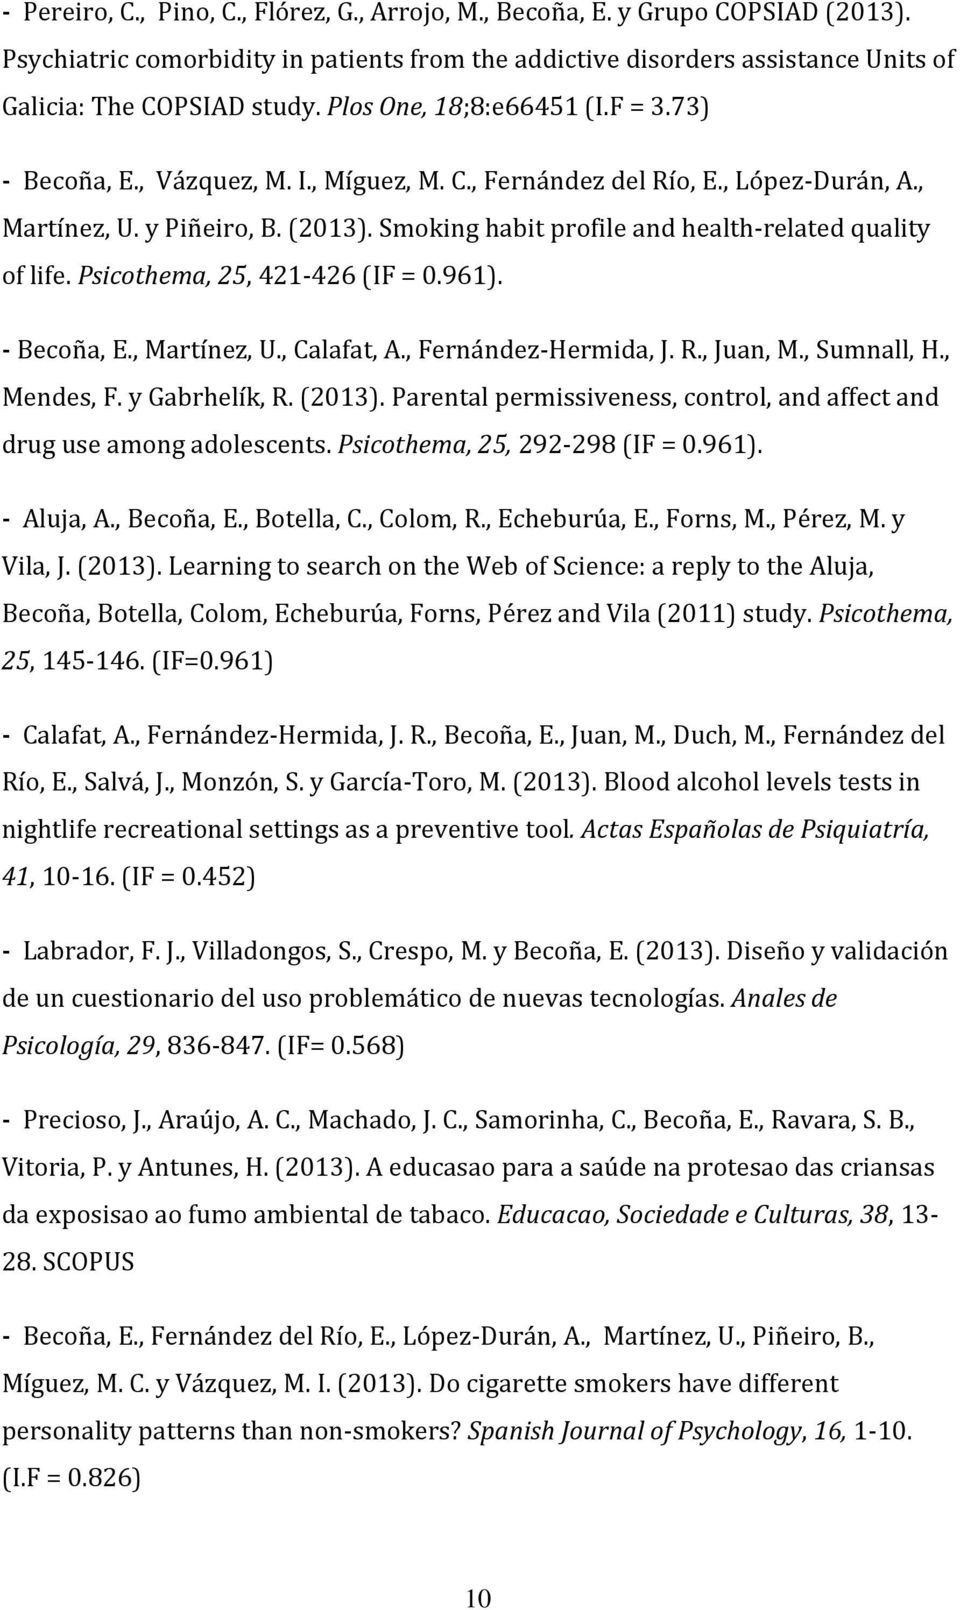 Smoking habit profile and health-related quality of life. Psicothema, 25, 421-426 (IF = 0.961). - Becoña, E., Martínez, U., Calafat, A., Fernández-Hermida, J. R., Juan, M., Sumnall, H., Mendes, F.